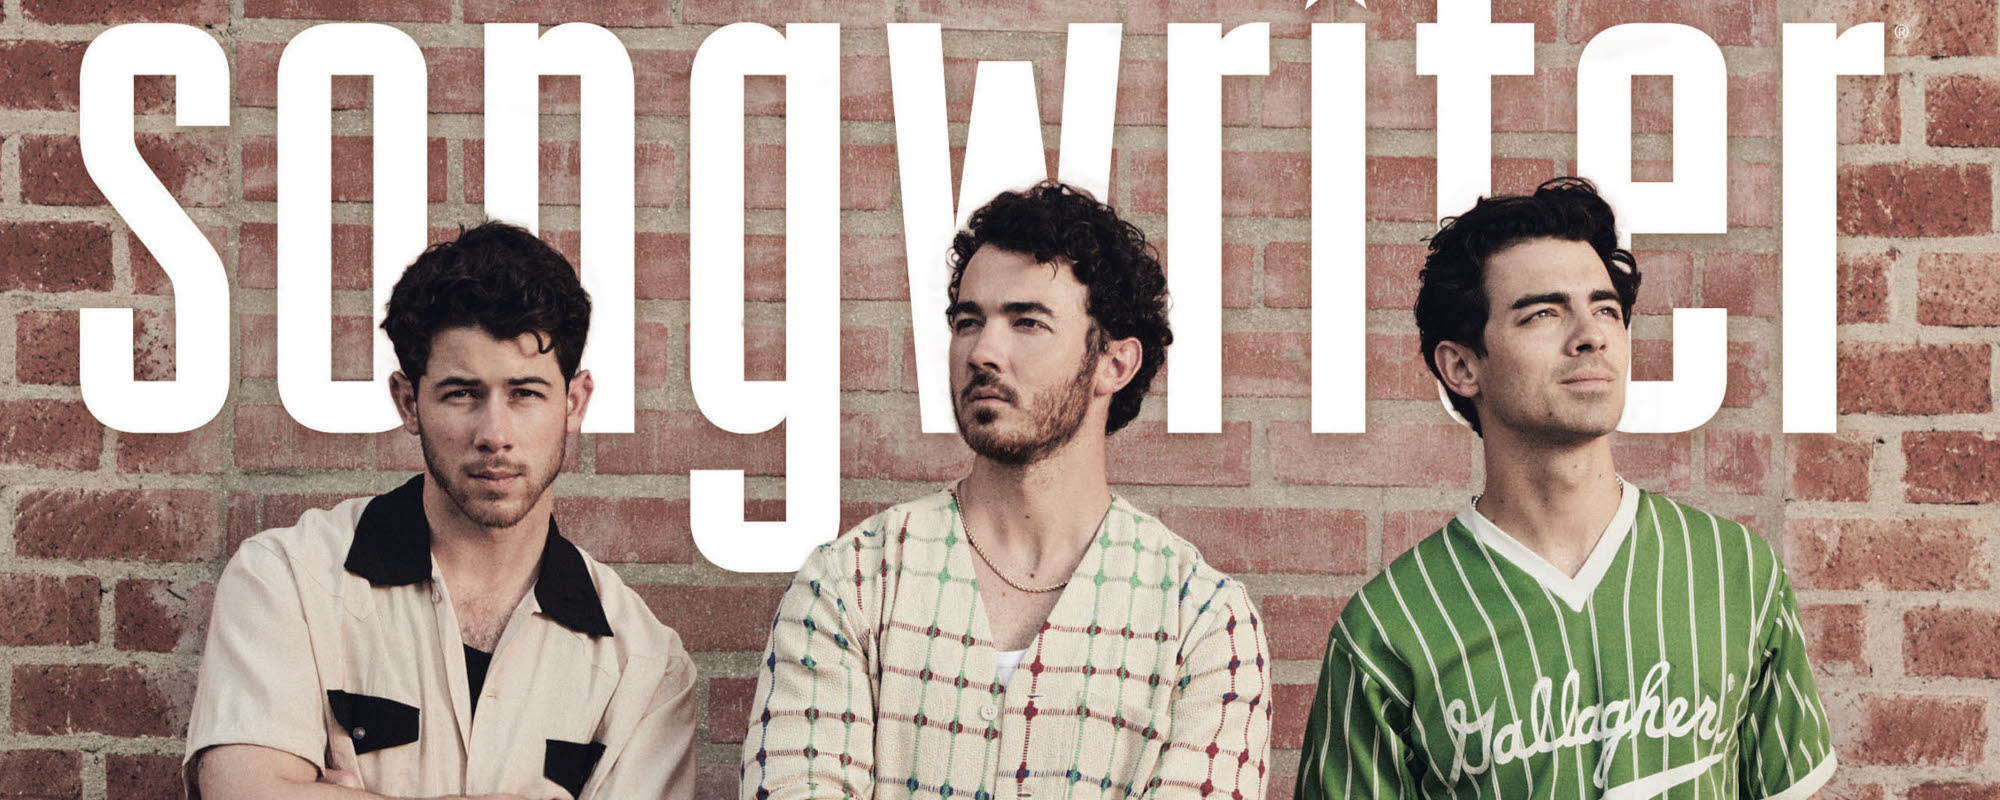 American Songwriter November/December Cover Story: Jonas Brothers Behind ‘The Album’—“It Really Has Been Mind-Blowingly Fun”